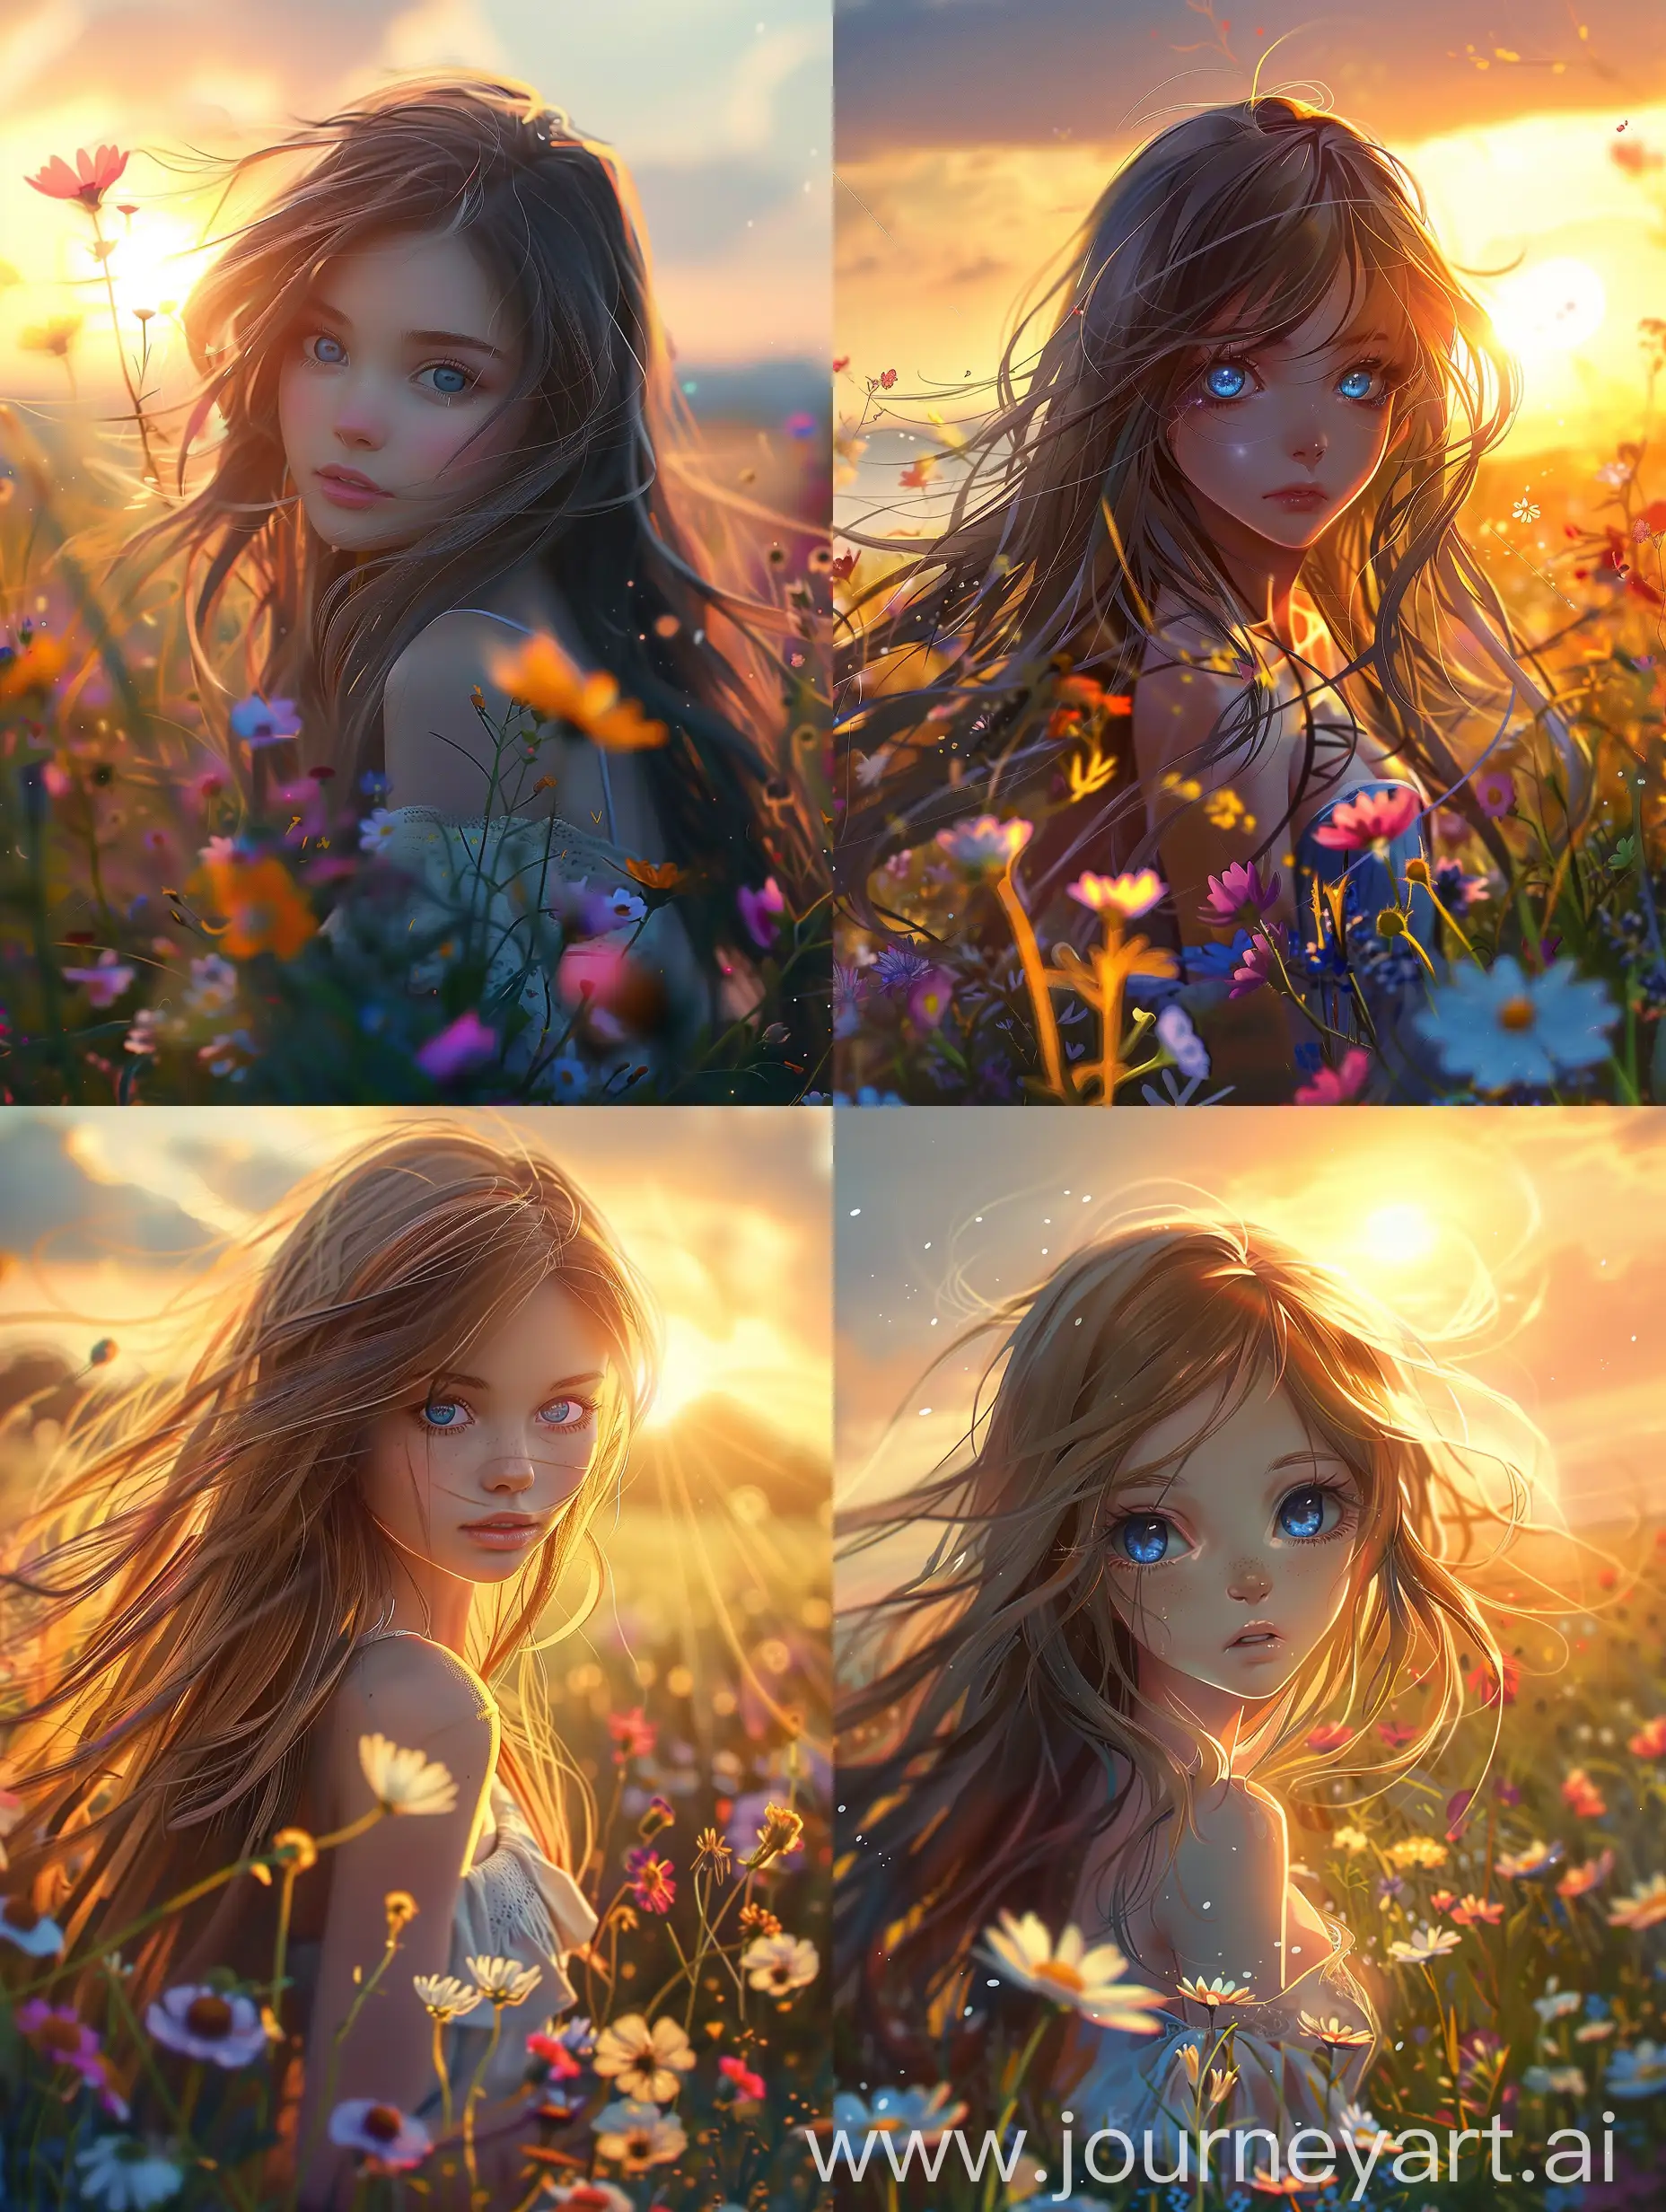 A stunningly beautiful girl with long, flowing hair and piercing blue eyes, standing in a field of wildflowers with the sun setting behind her.